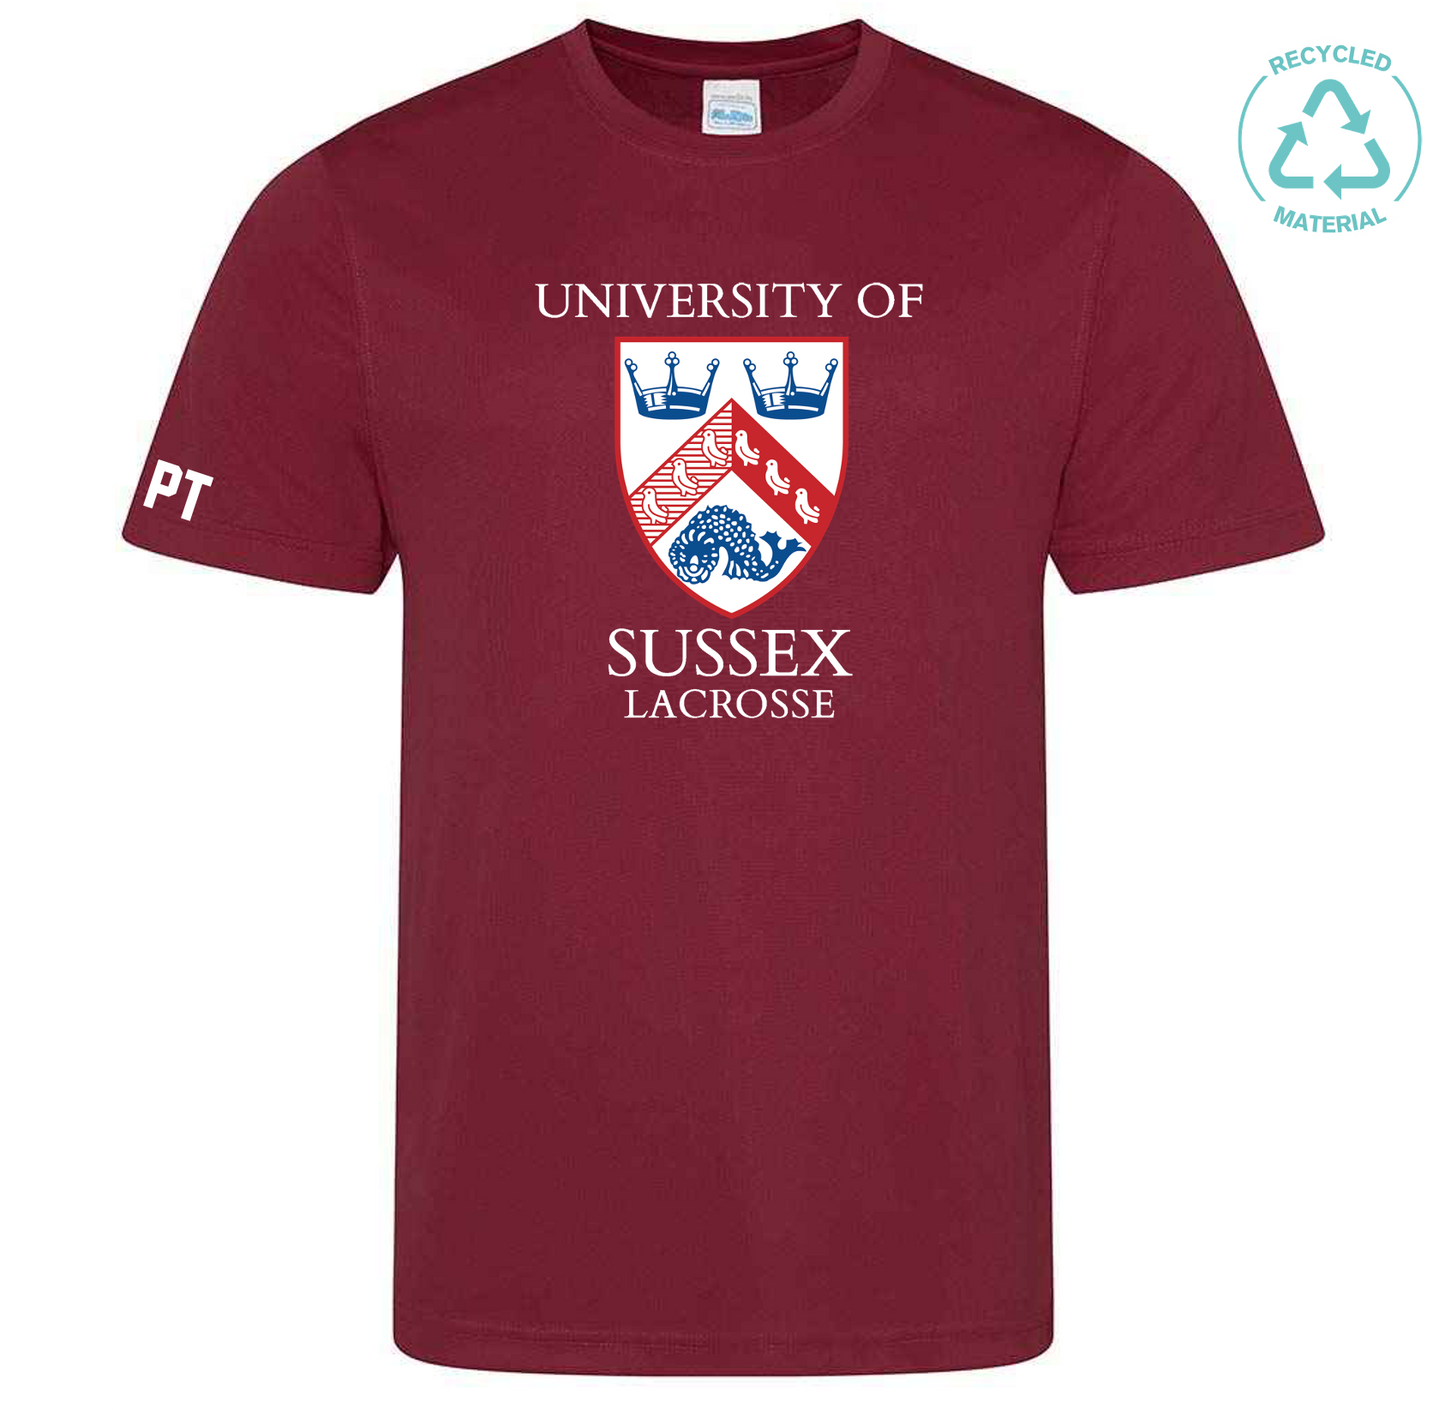 Uni of Sussex Recycled Tech Tee